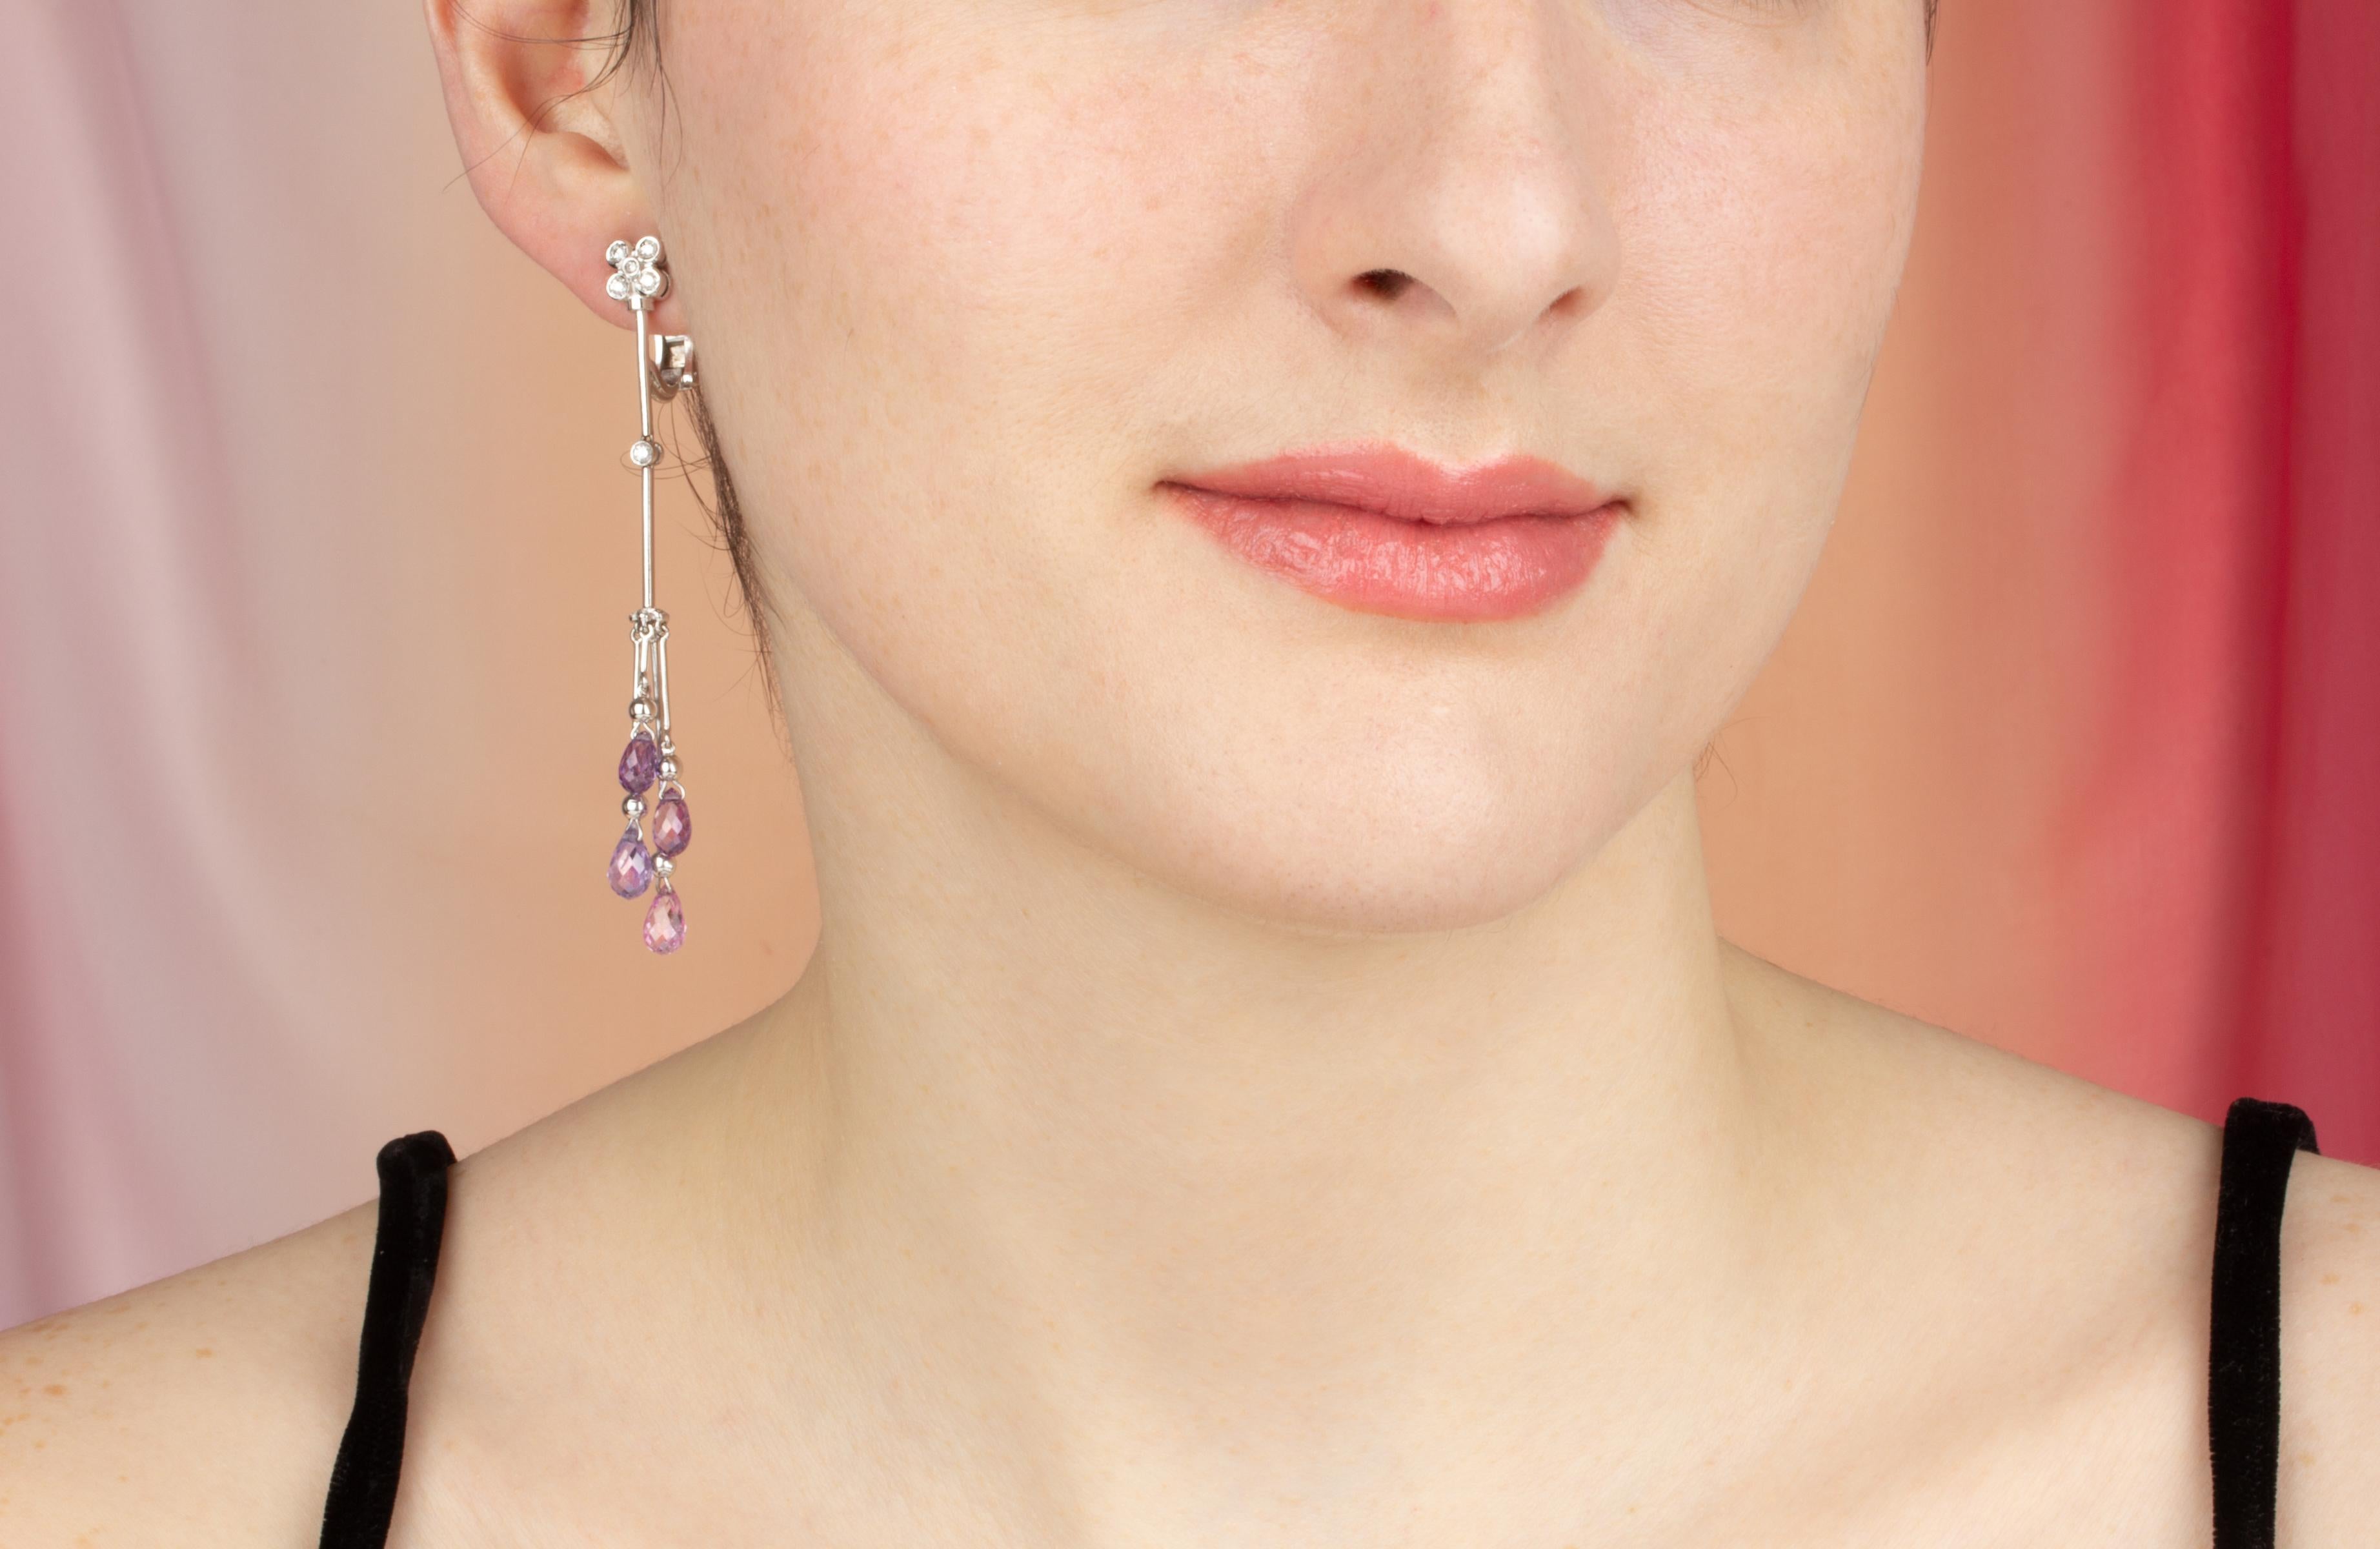 These multicolor sapphire and diamond drop earrings feature 8 briolette sapphires of different colors for a total of approximately 11 carats in a playful and flexible design. The earring is complete with 0.30 carats of round diamonds of top quality